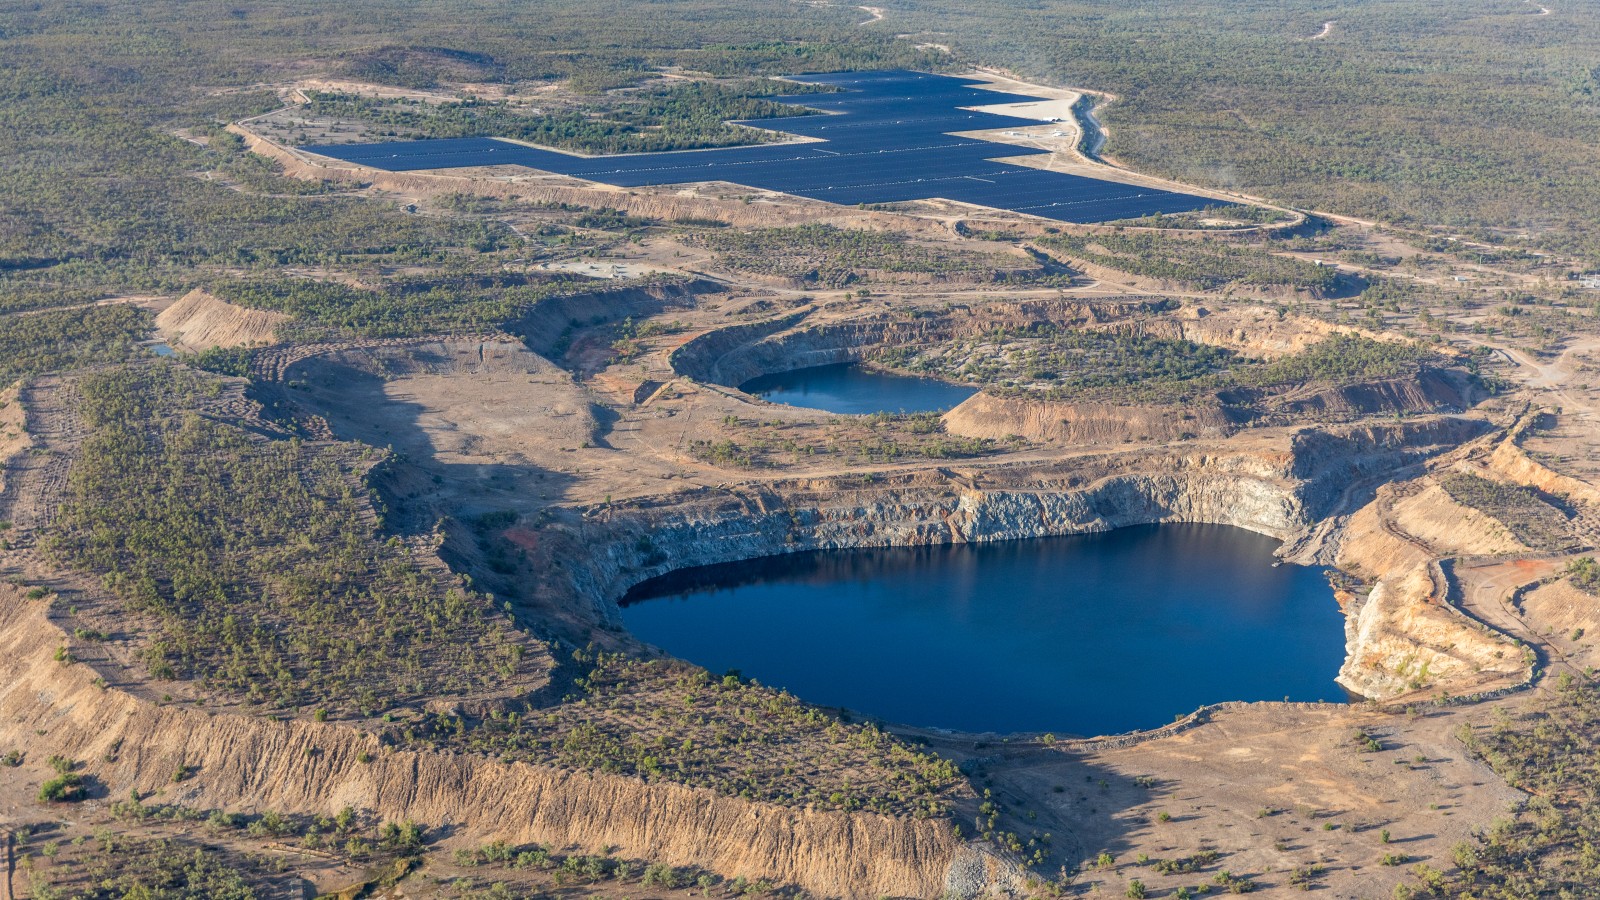 Kidston pumped hydro energy storage project in Queensland